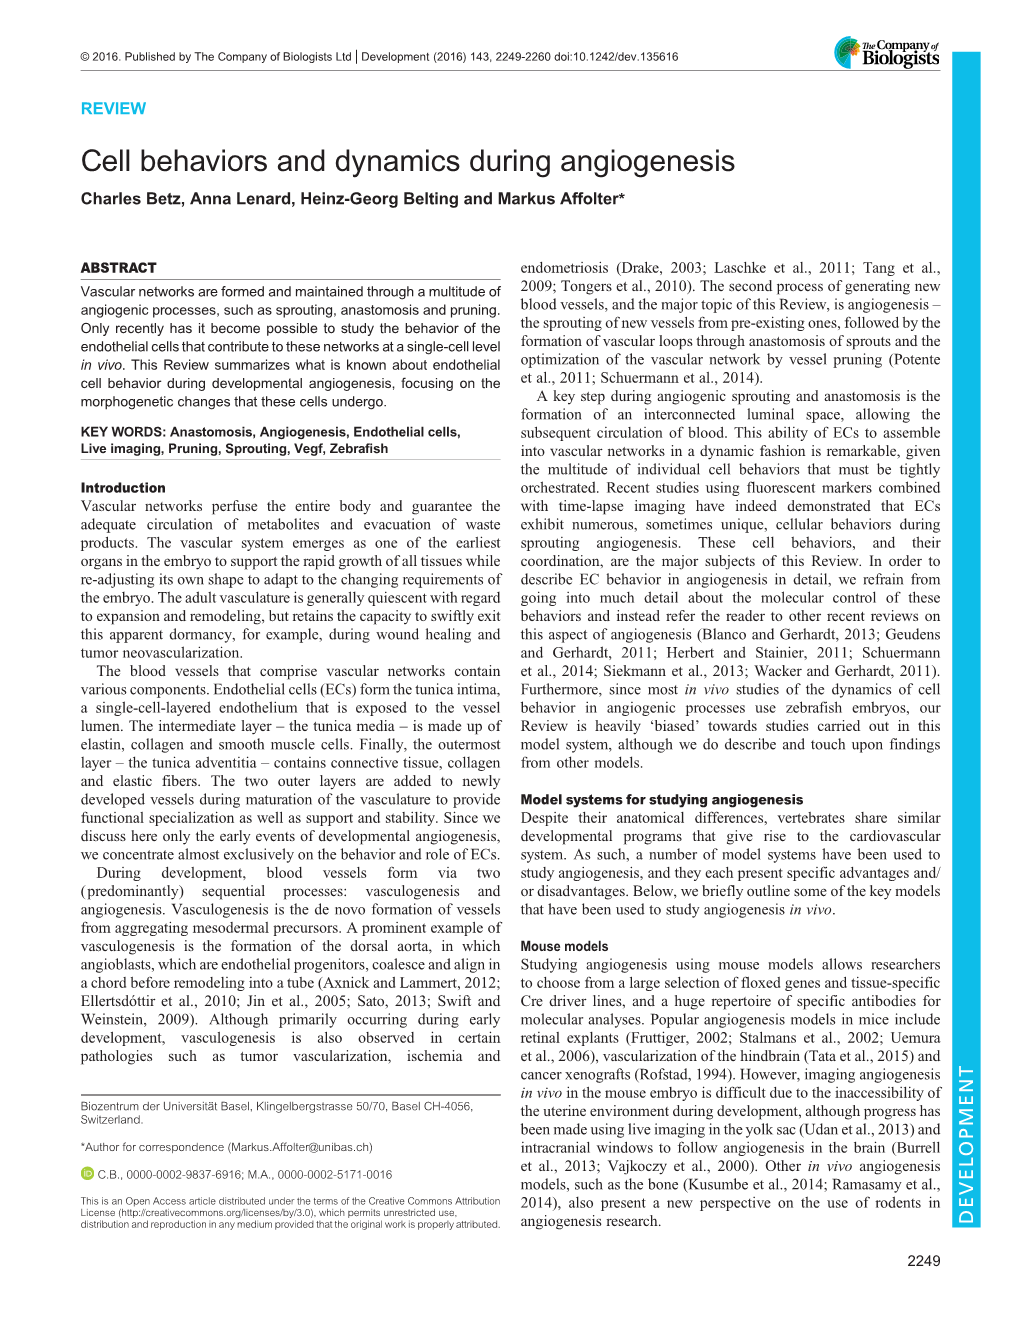 Cell Behaviors and Dynamics During Angiogenesis Charles Betz, Anna Lenard, Heinz-Georg Belting and Markus Affolter*